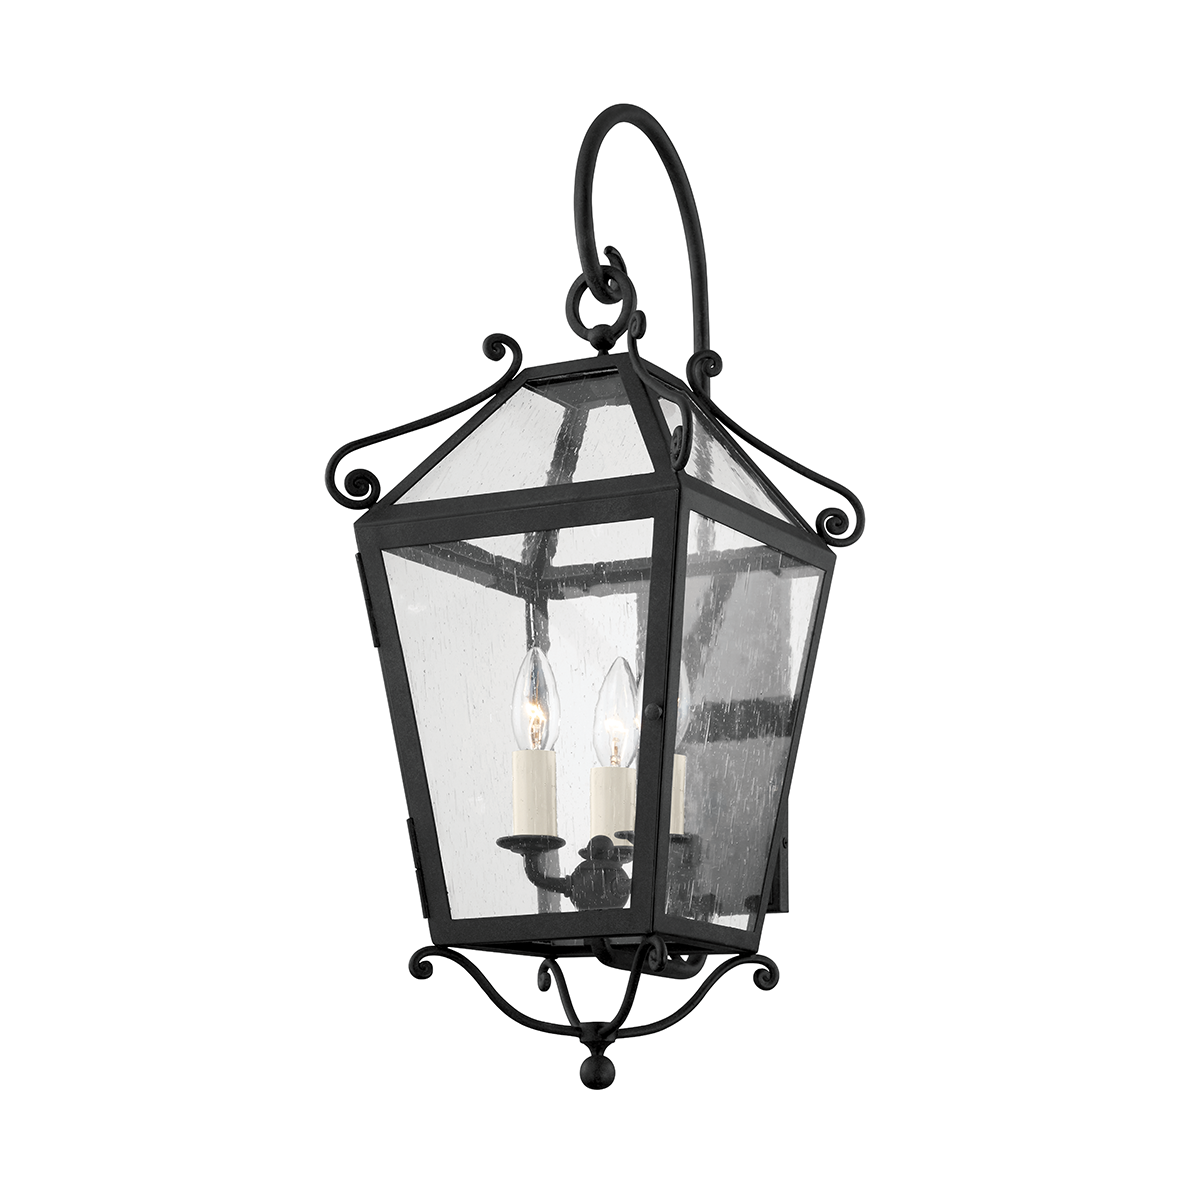 Troy Lighting 3 LIGHT MEDIUM EXTERIOR WALL SCONCE B4123 Outdoor l Wall Troy Lighting FRENCH IRON  